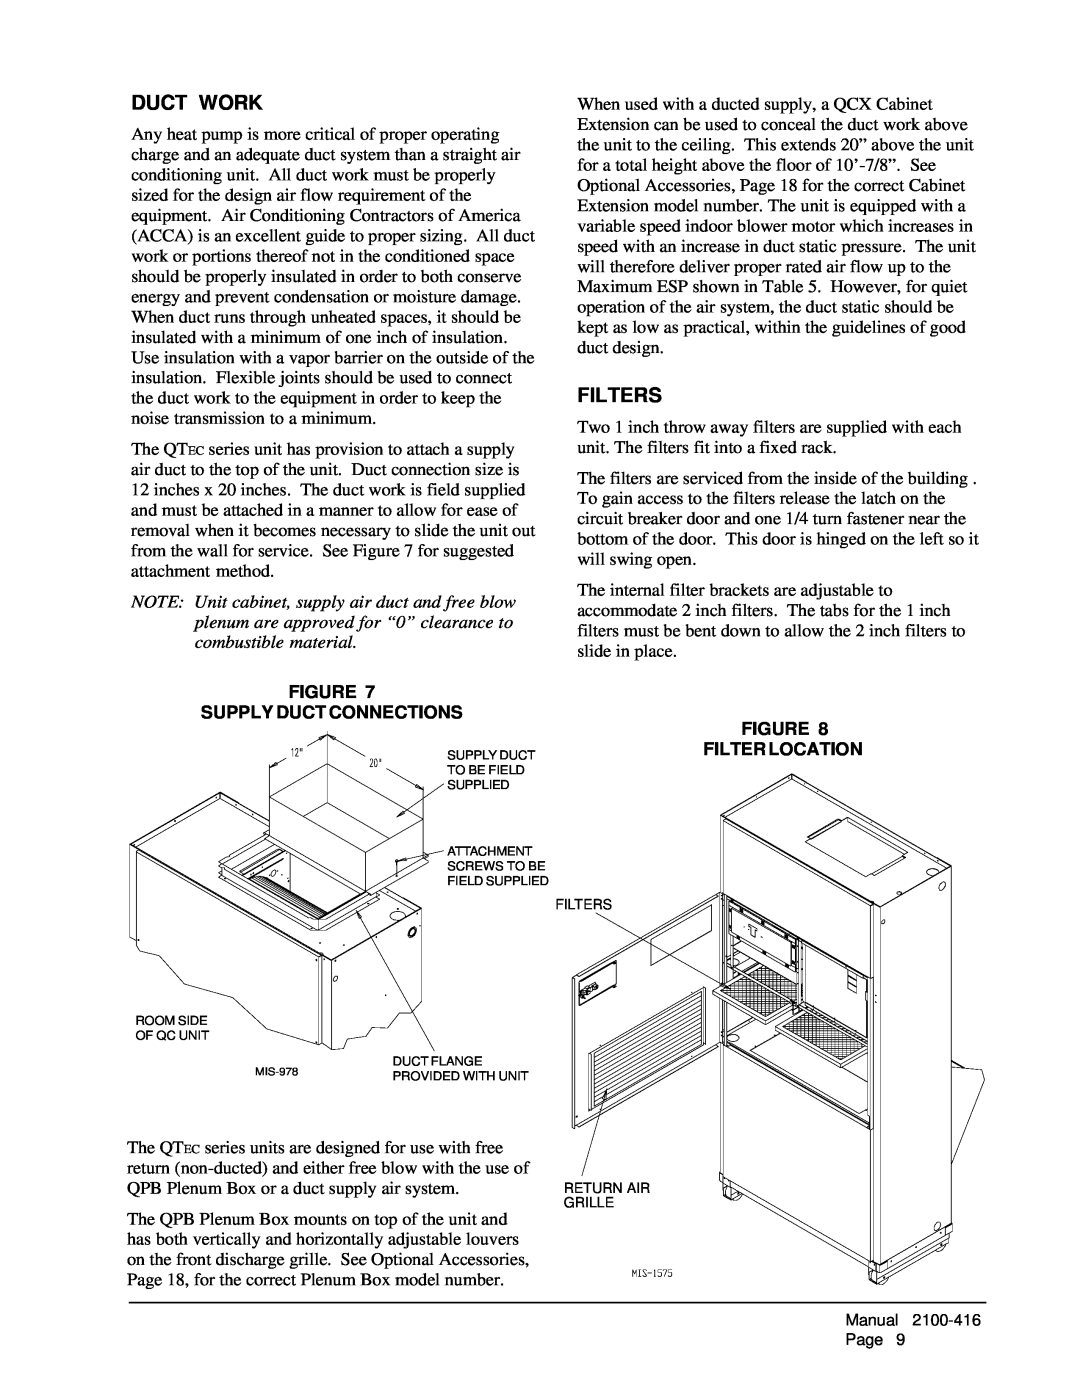 Bard QC501 installation instructions Duct Work, Filters, Figure Supply Duct Connections, Figure Filter Location 